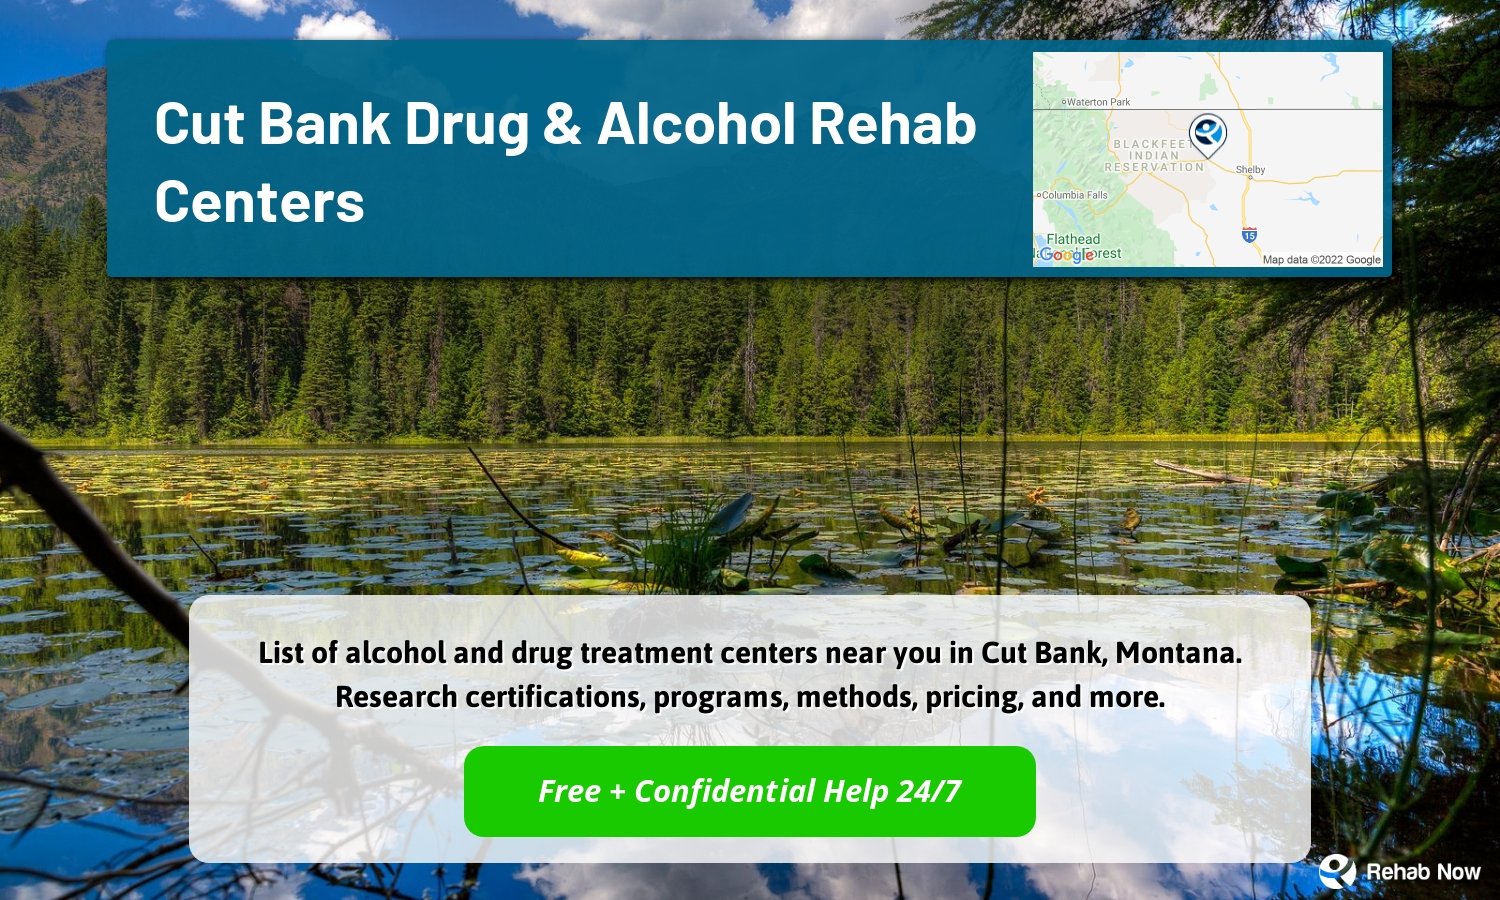 List of alcohol and drug treatment centers near you in Cut Bank, Montana. Research certifications, programs, methods, pricing, and more.